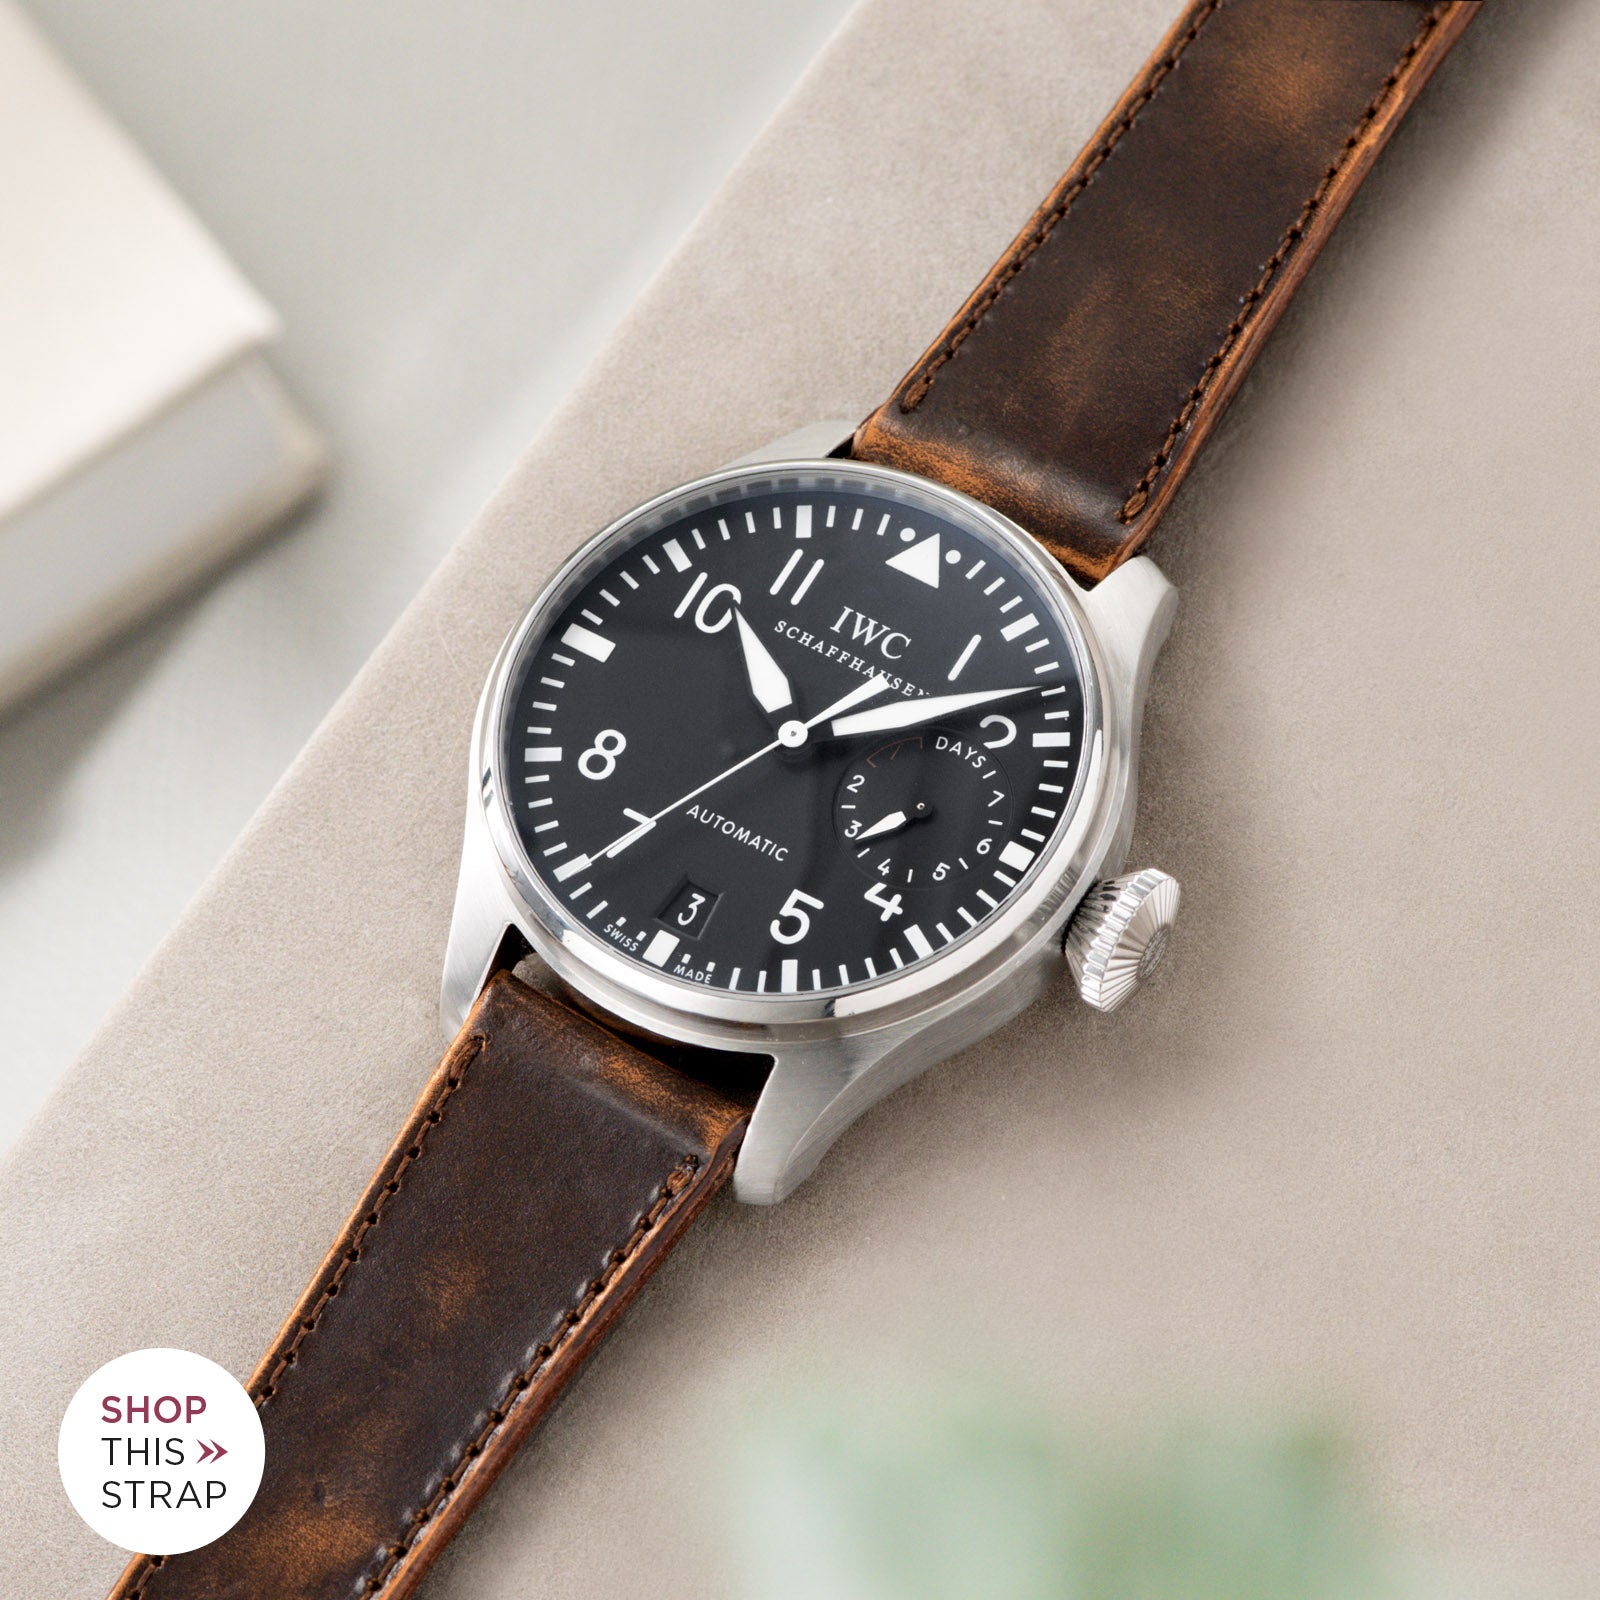 Bulang and Sons_Strap Guide_IWC Big Pilot Ref 5004_Degrade Honey Brown Leather Watch Strap